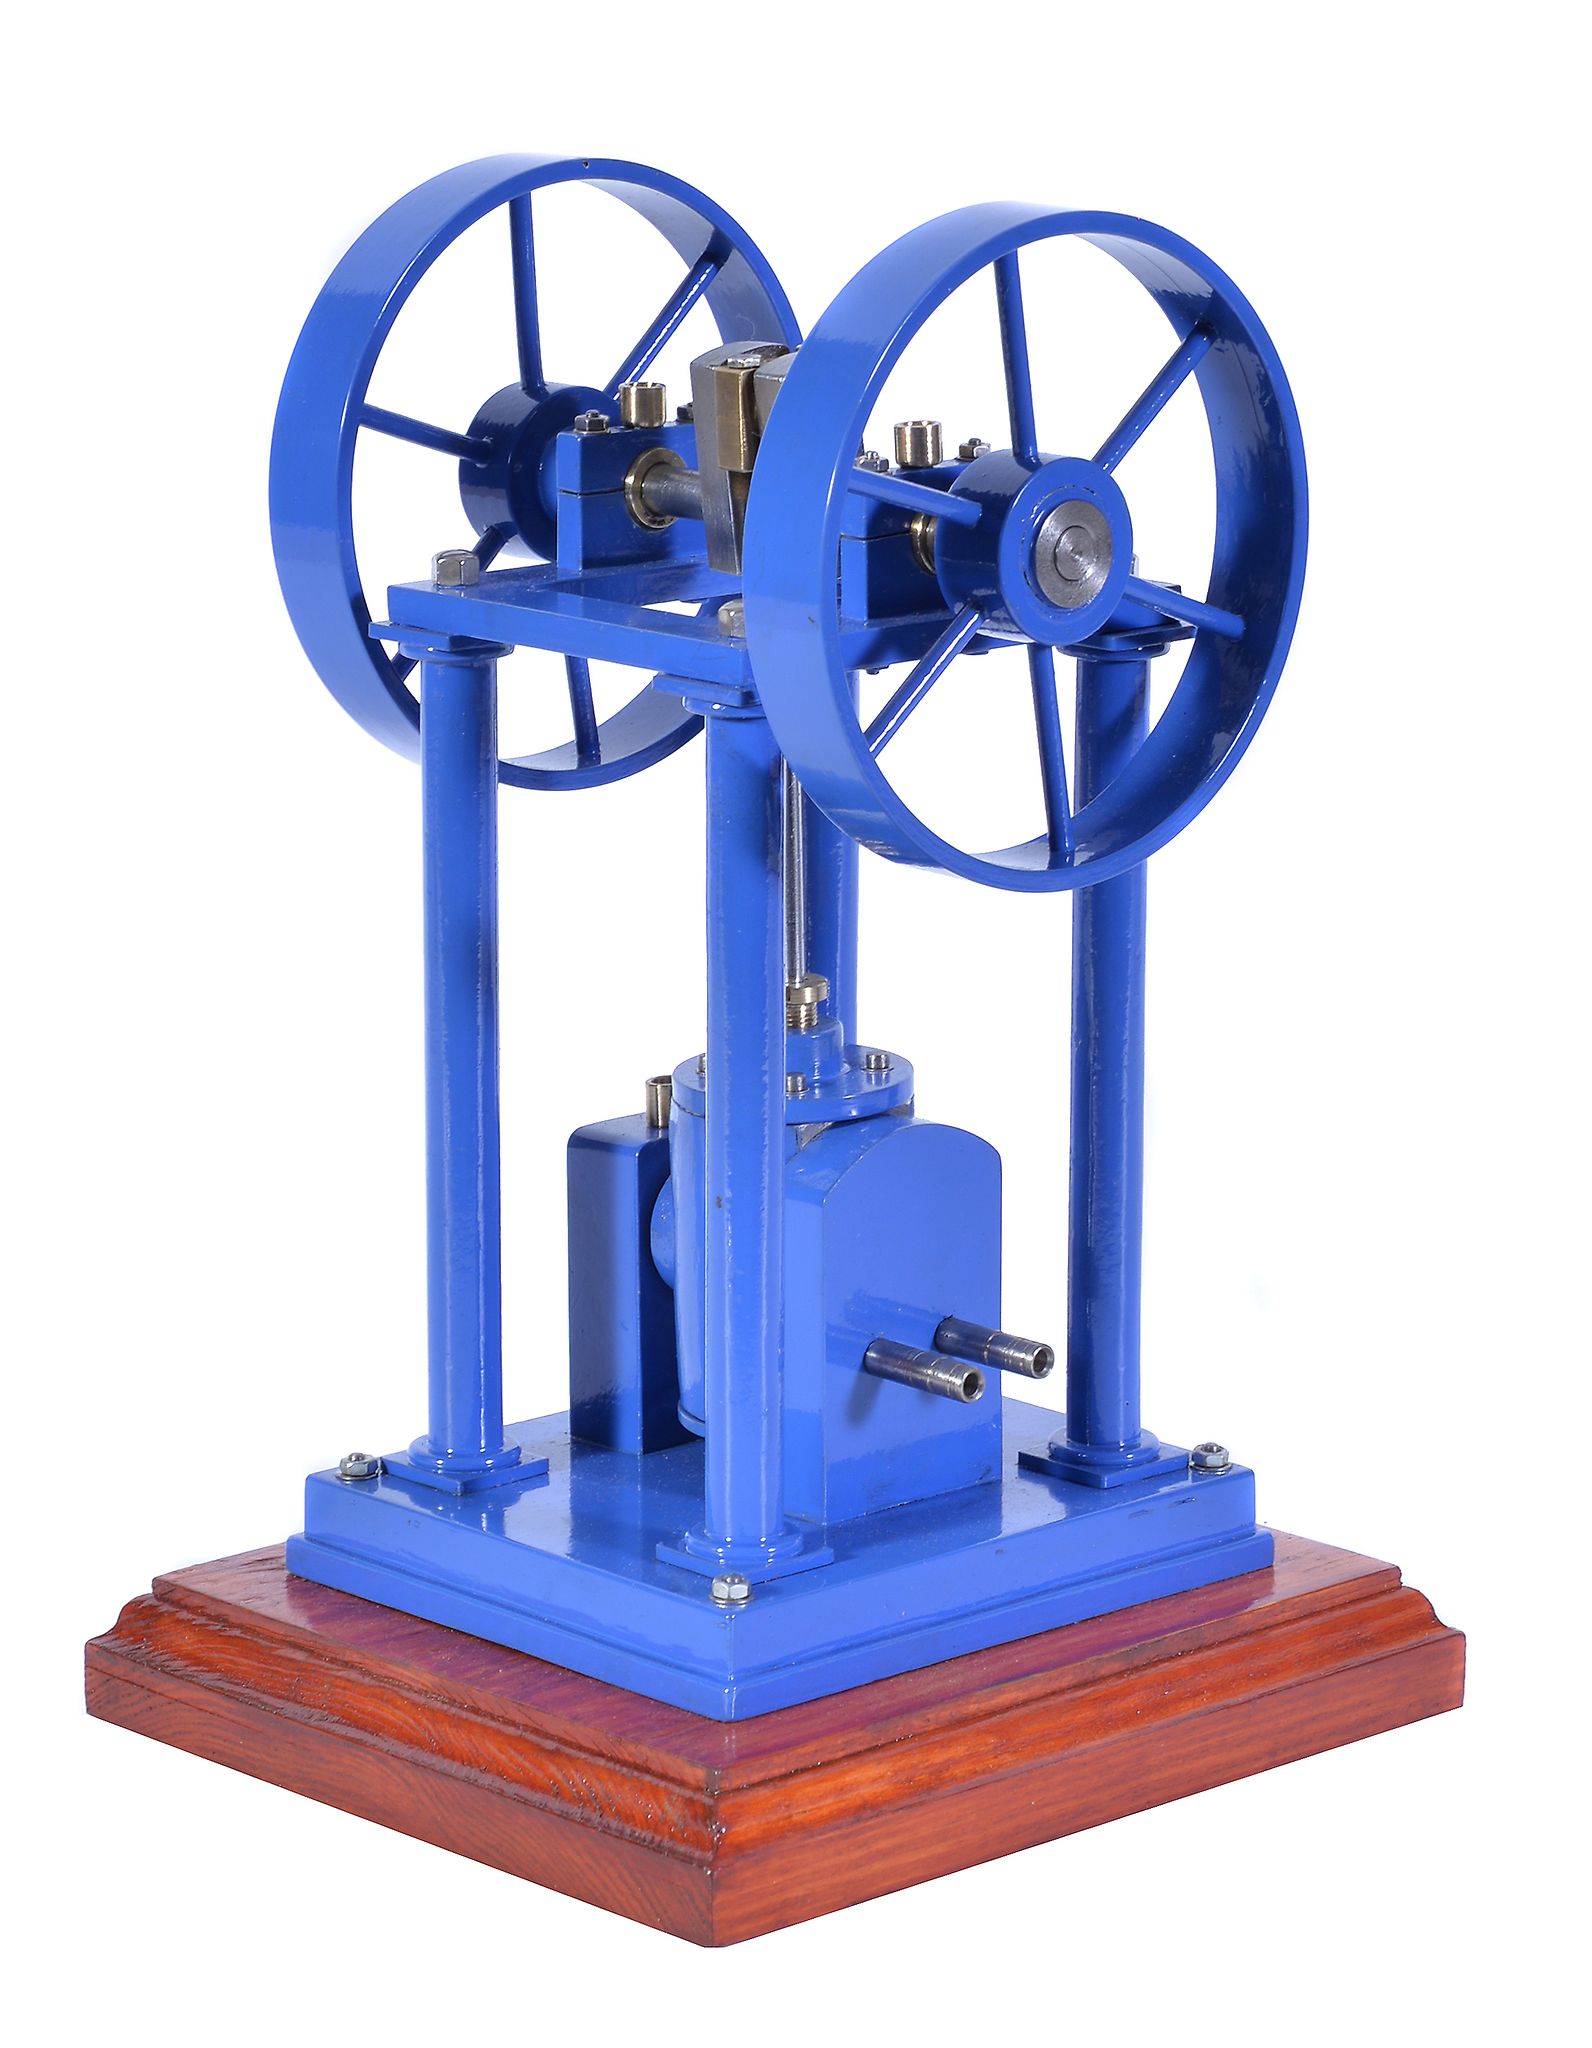 A well-engineered model of an over-type double acting steam engine, built by Mr D Russell of - Image 2 of 3